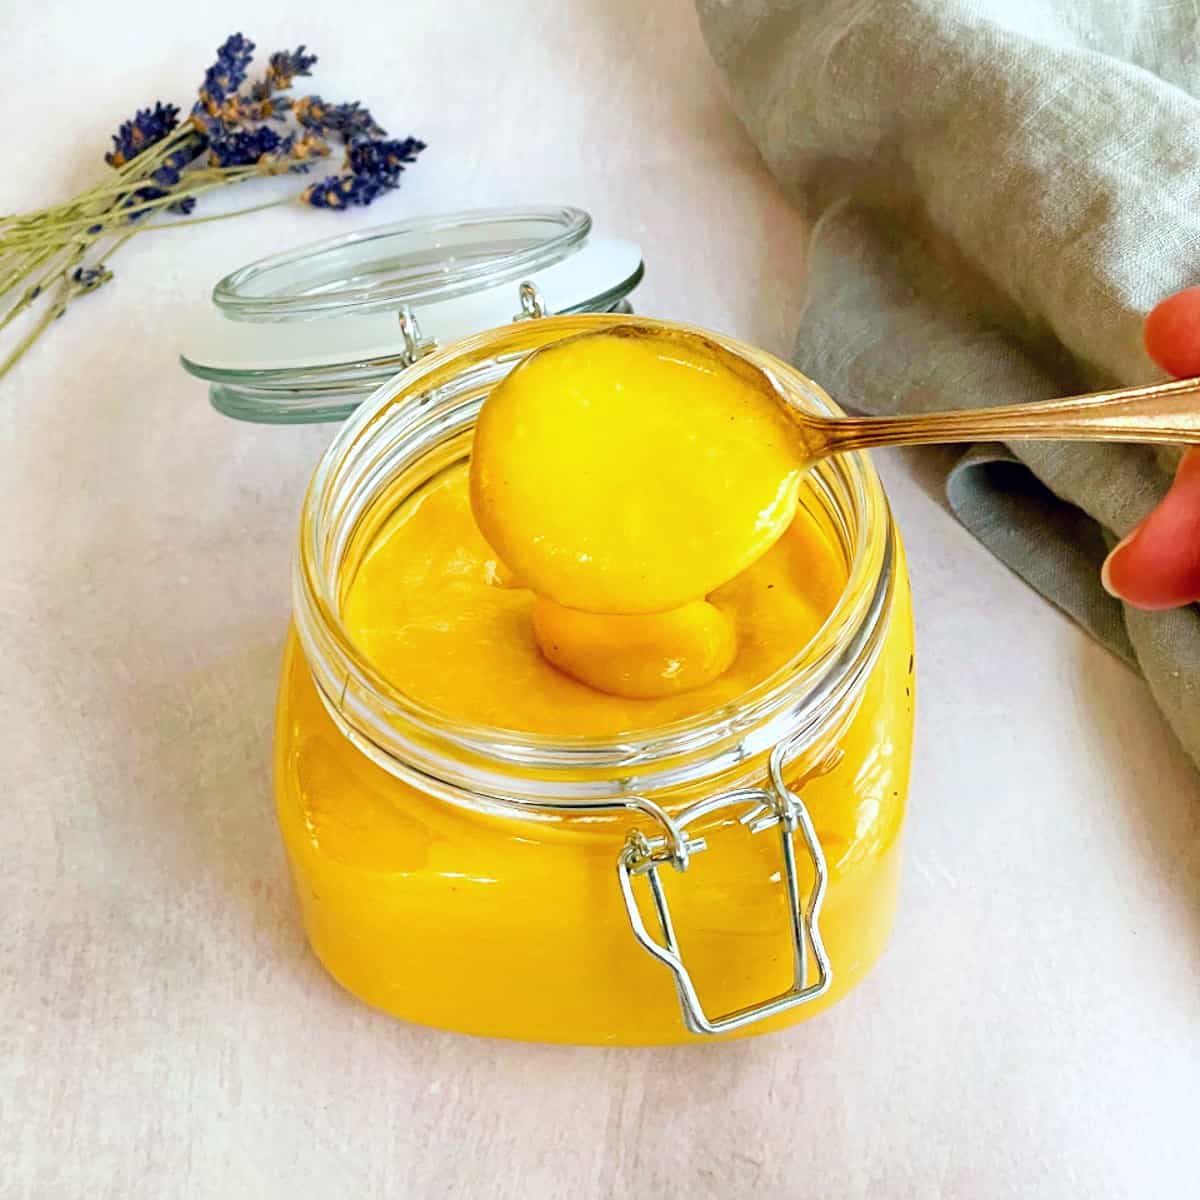 microwave passion fruit curd